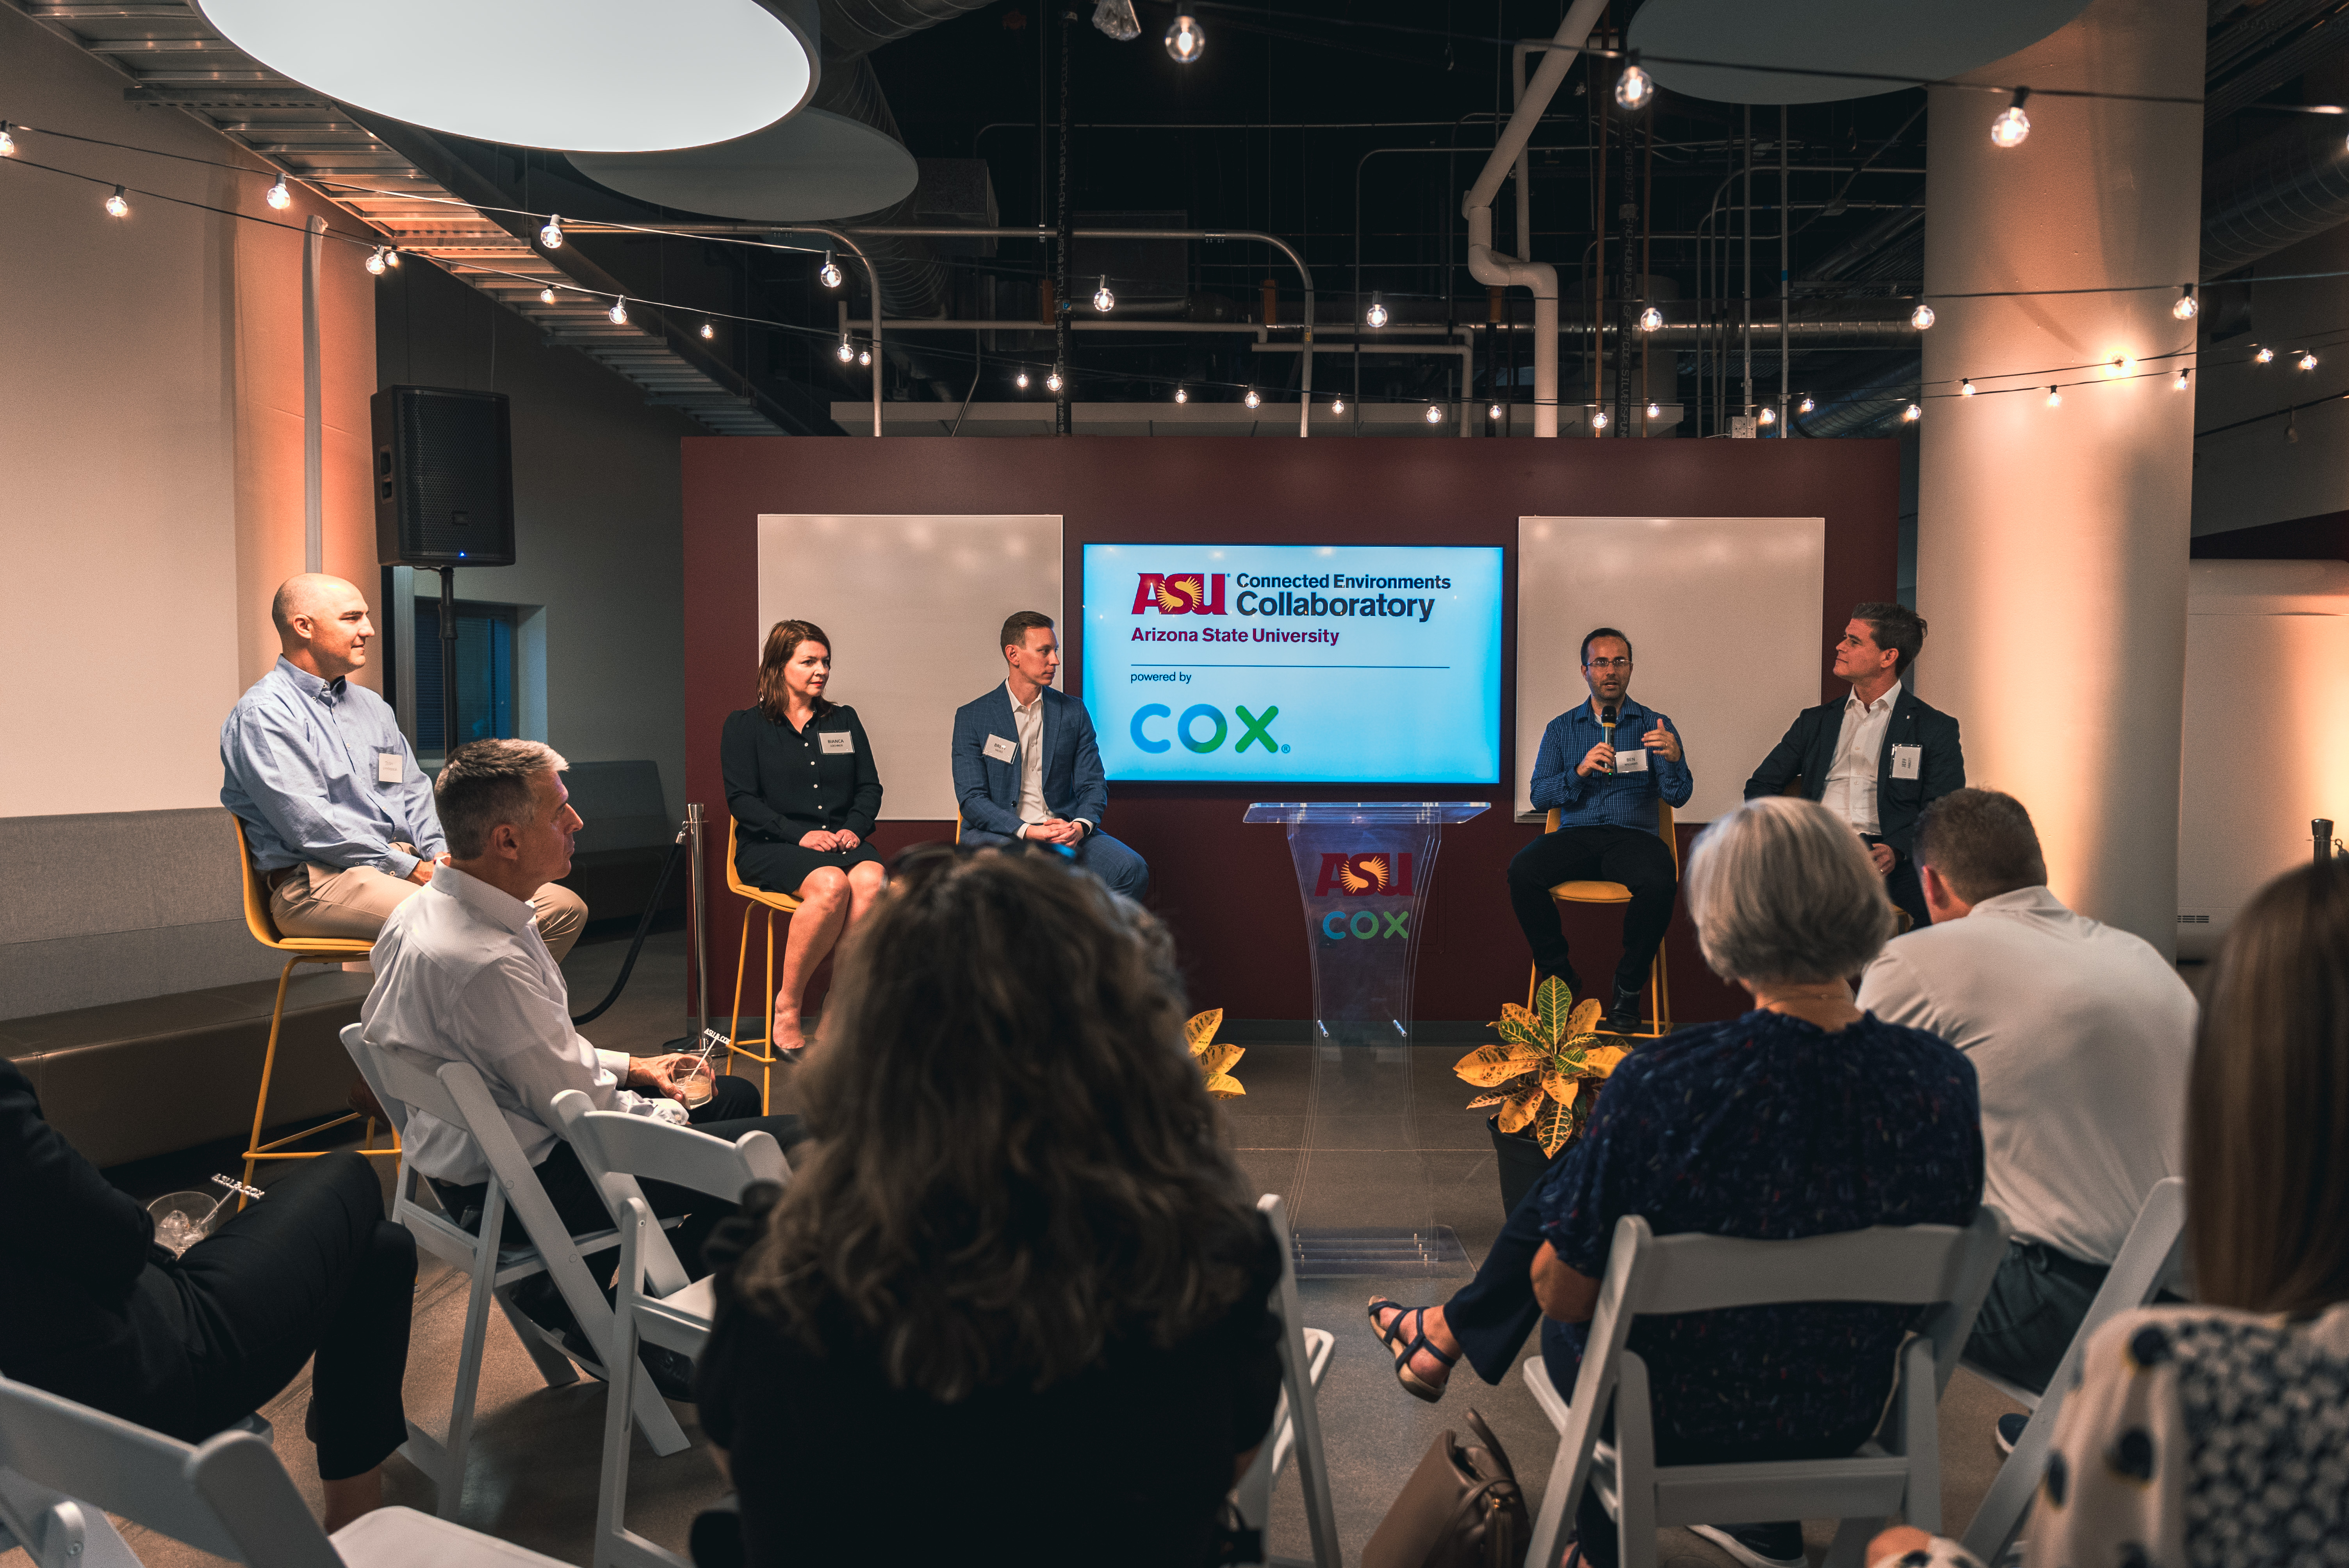 Expert panel presents at the Collaboratory Innovation Experience on October 12.